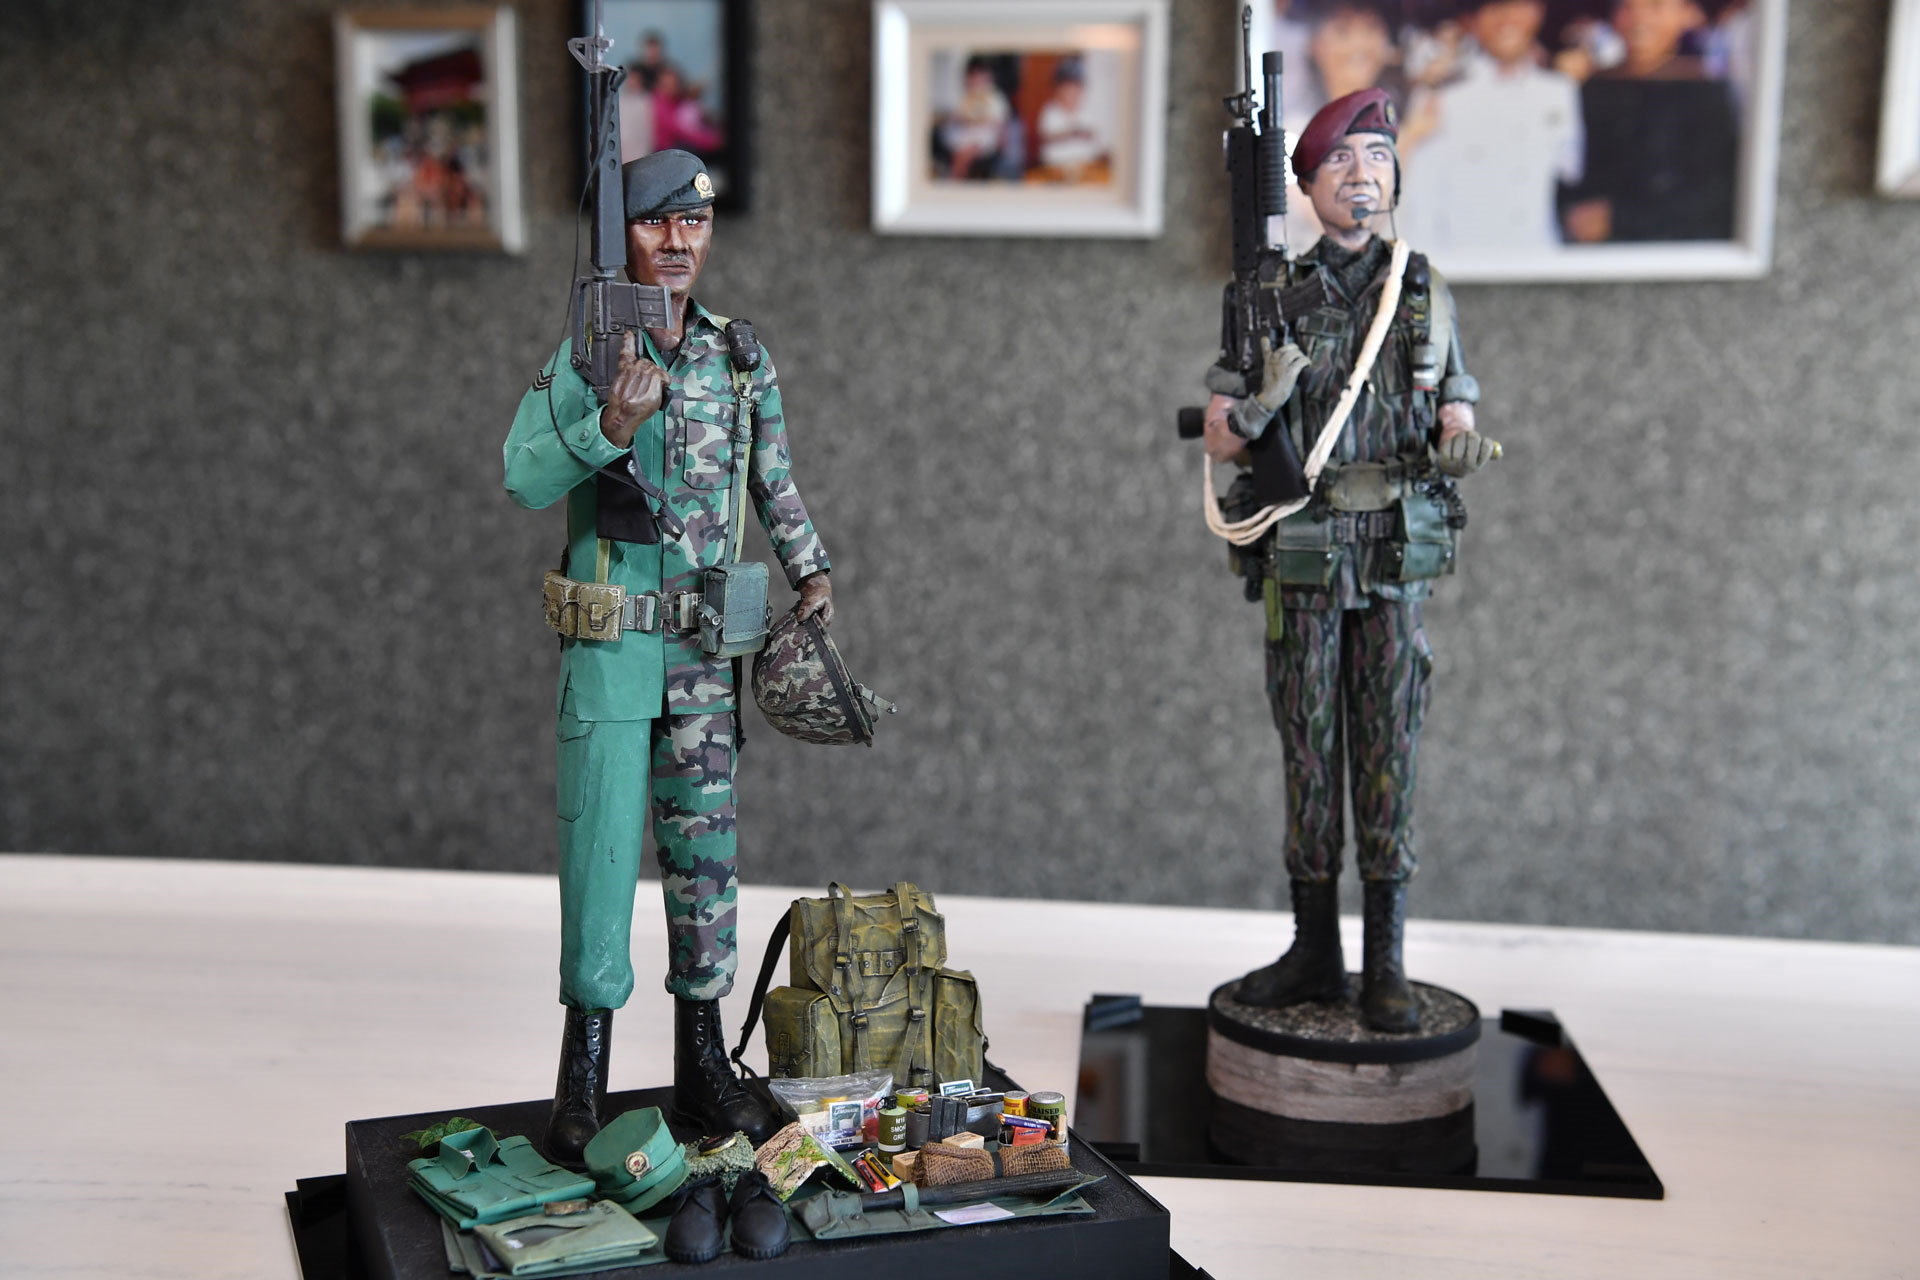 S'pore artist creates nostalgic miniature soldier models out of cardboard